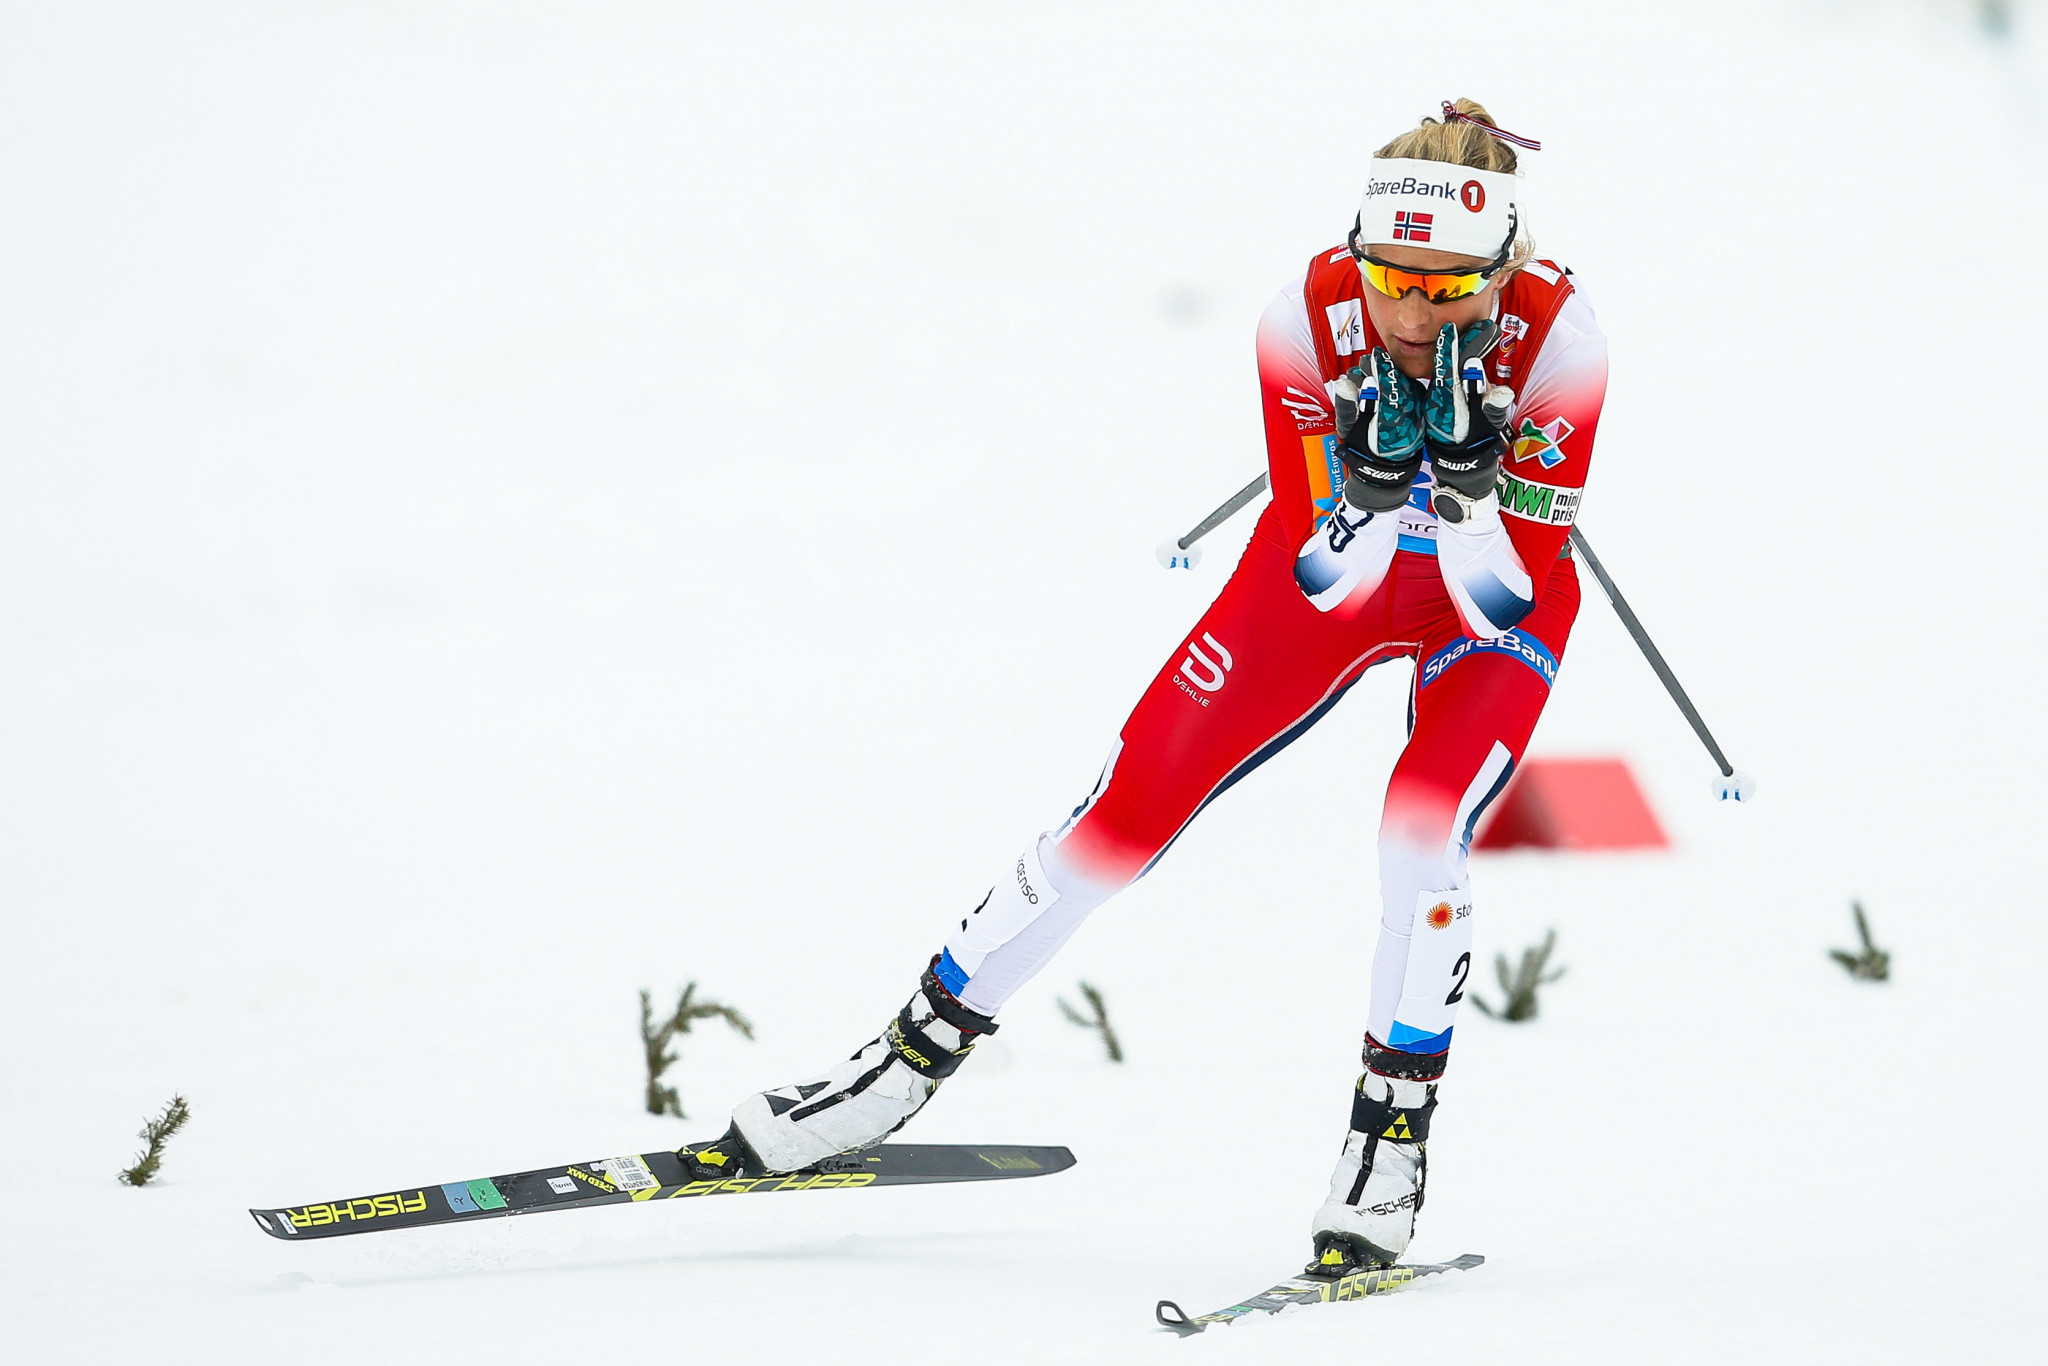 Norway's Therese Johaug secured her third title of the FIS Nordic World Ski Championships in Seefeld today ©Getty Images